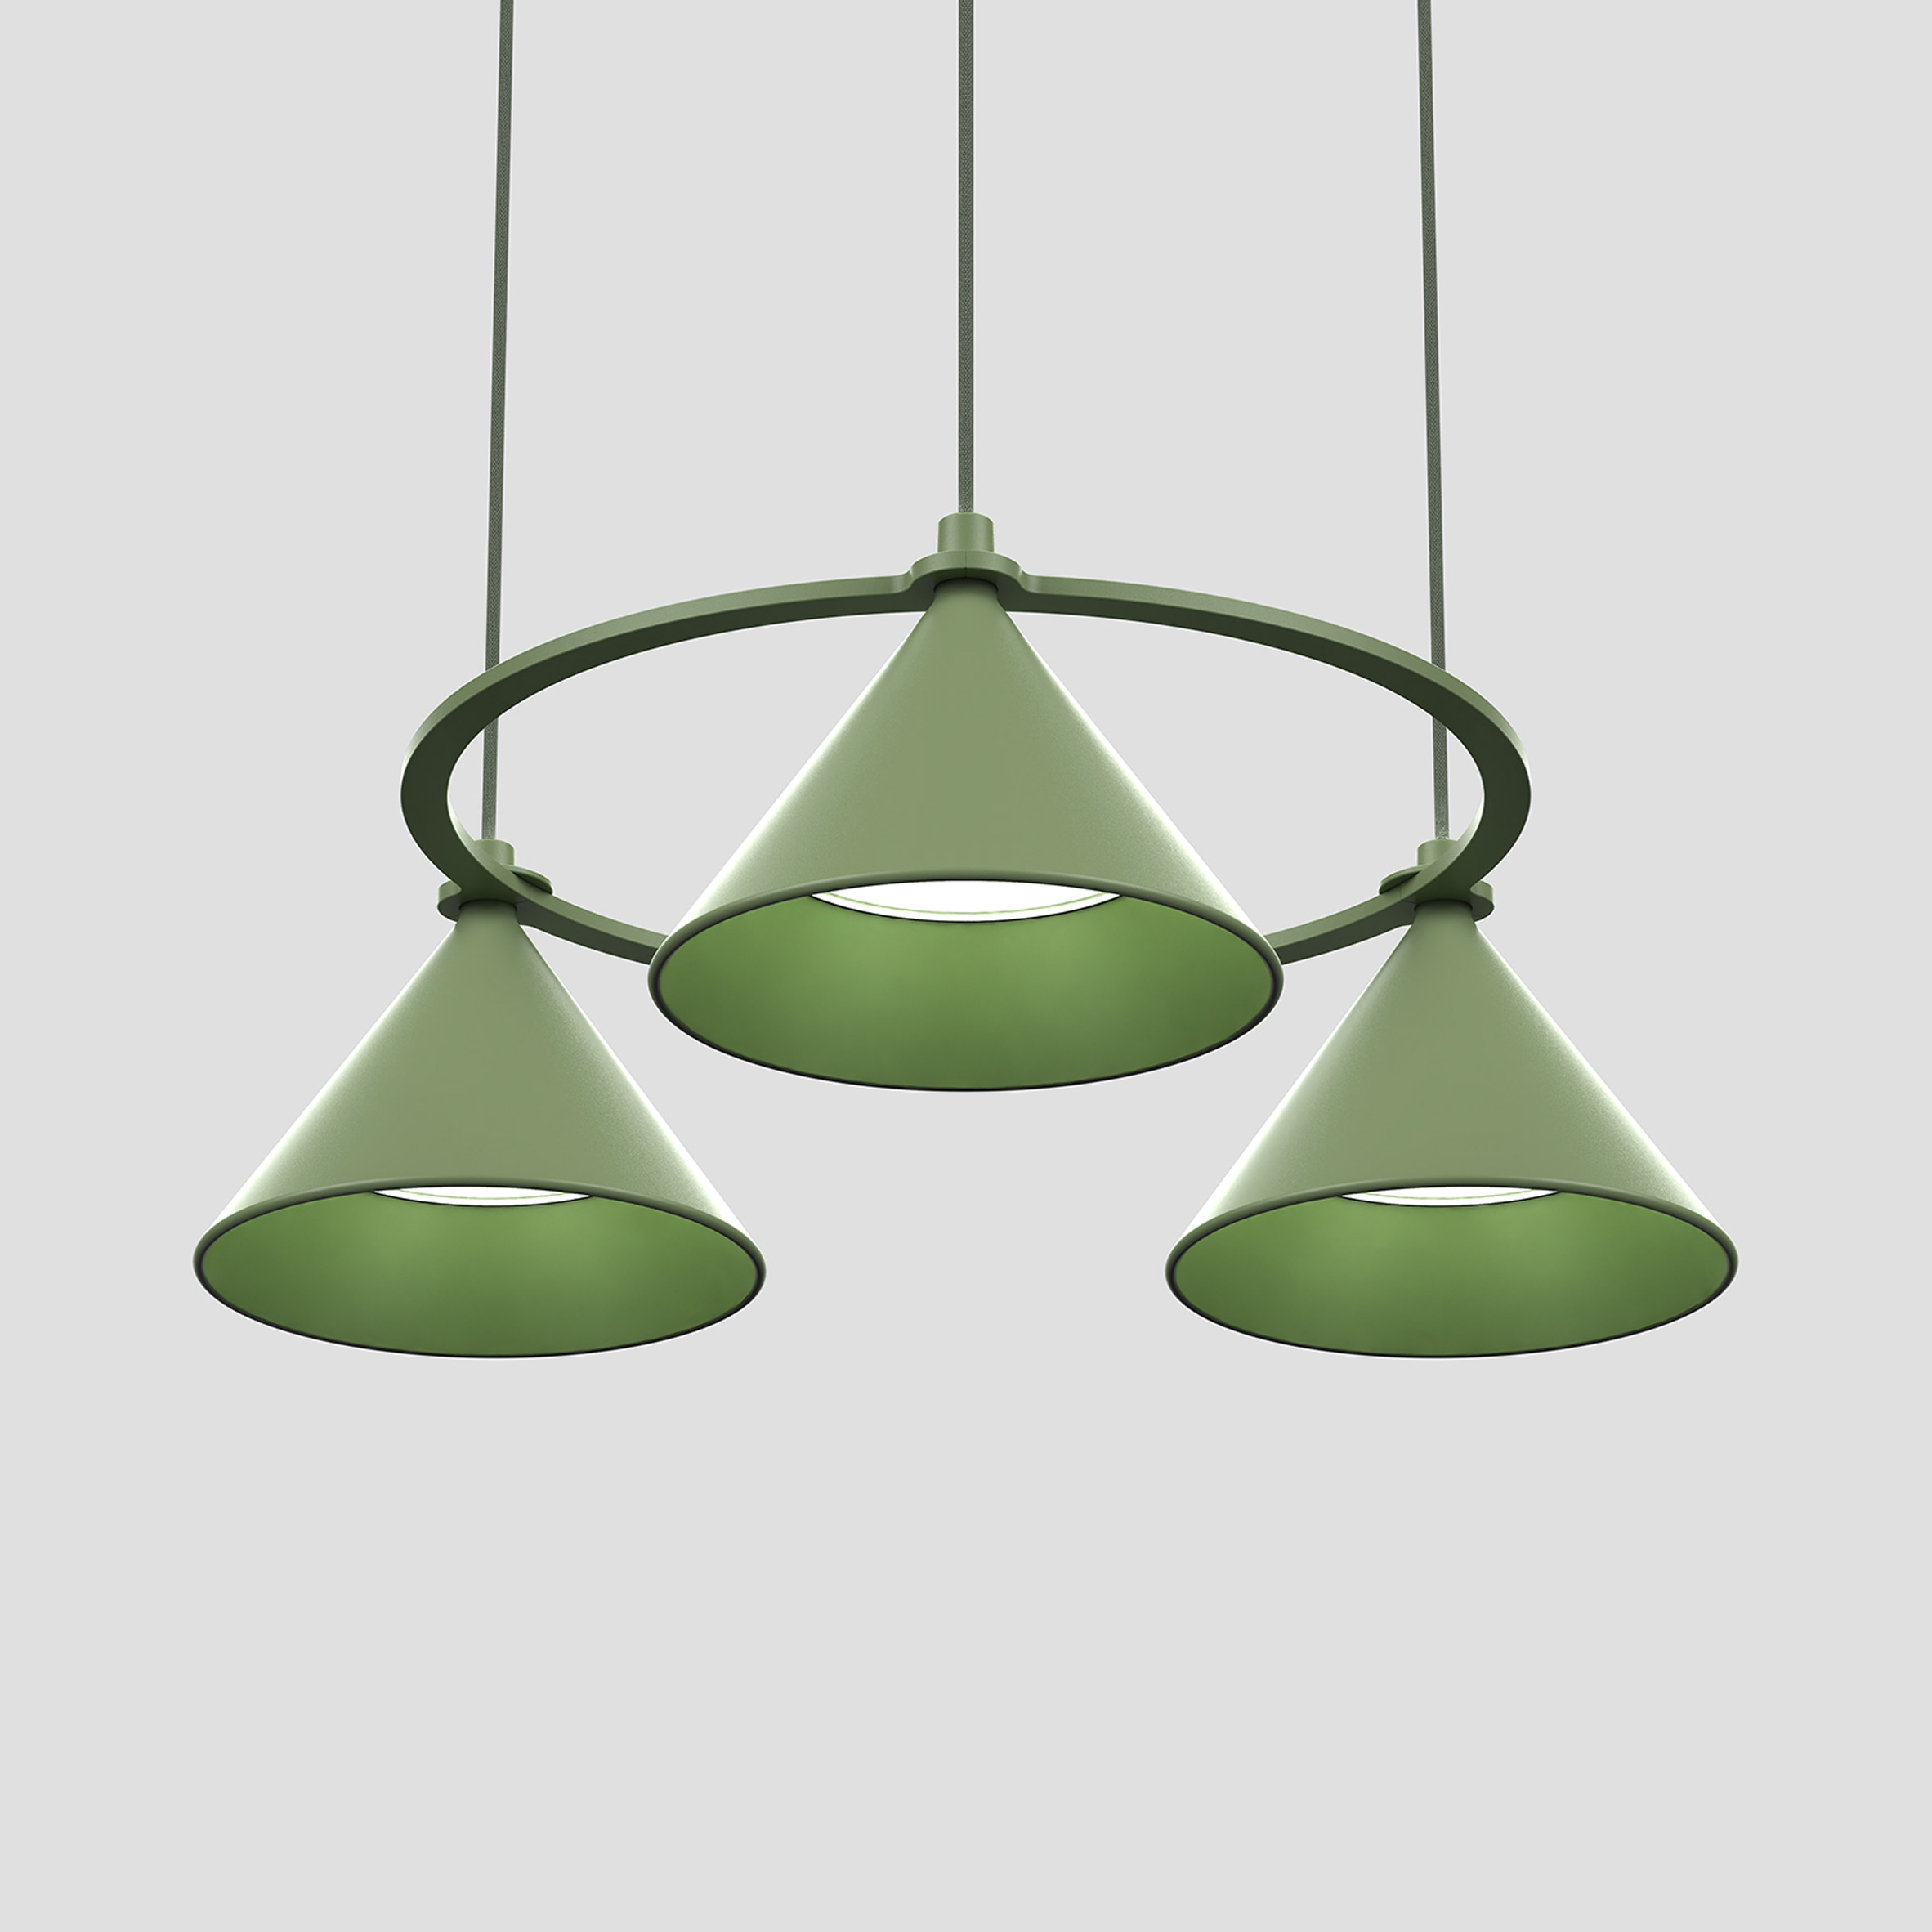 Green Lumo pendant Lumo by Thomas Bernstrand for Zero Lighting with four conical shades in a circular mount as seen from below